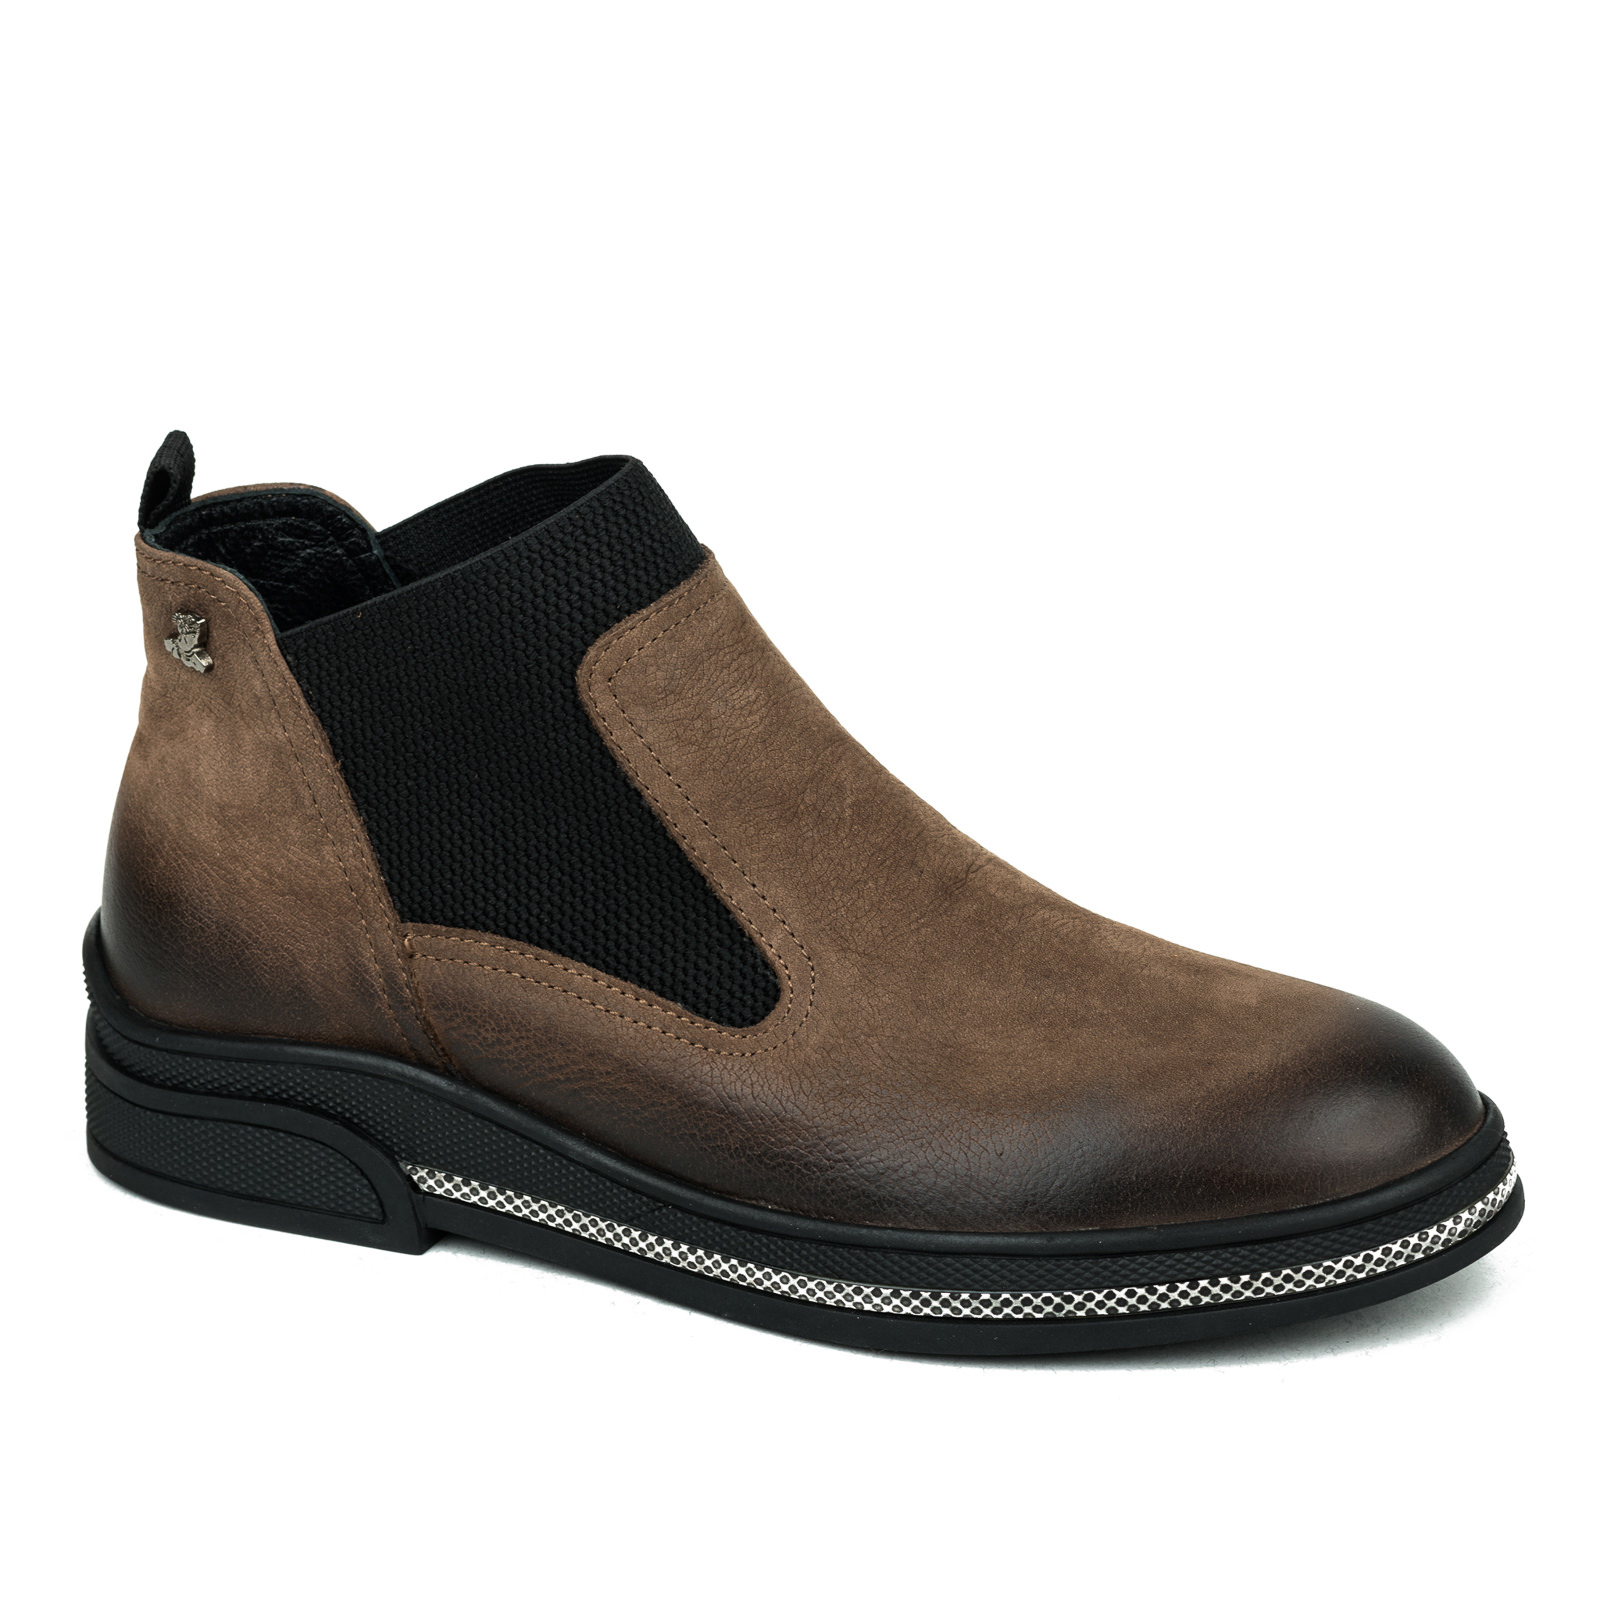 Leather ankle boots B211 - BROWN